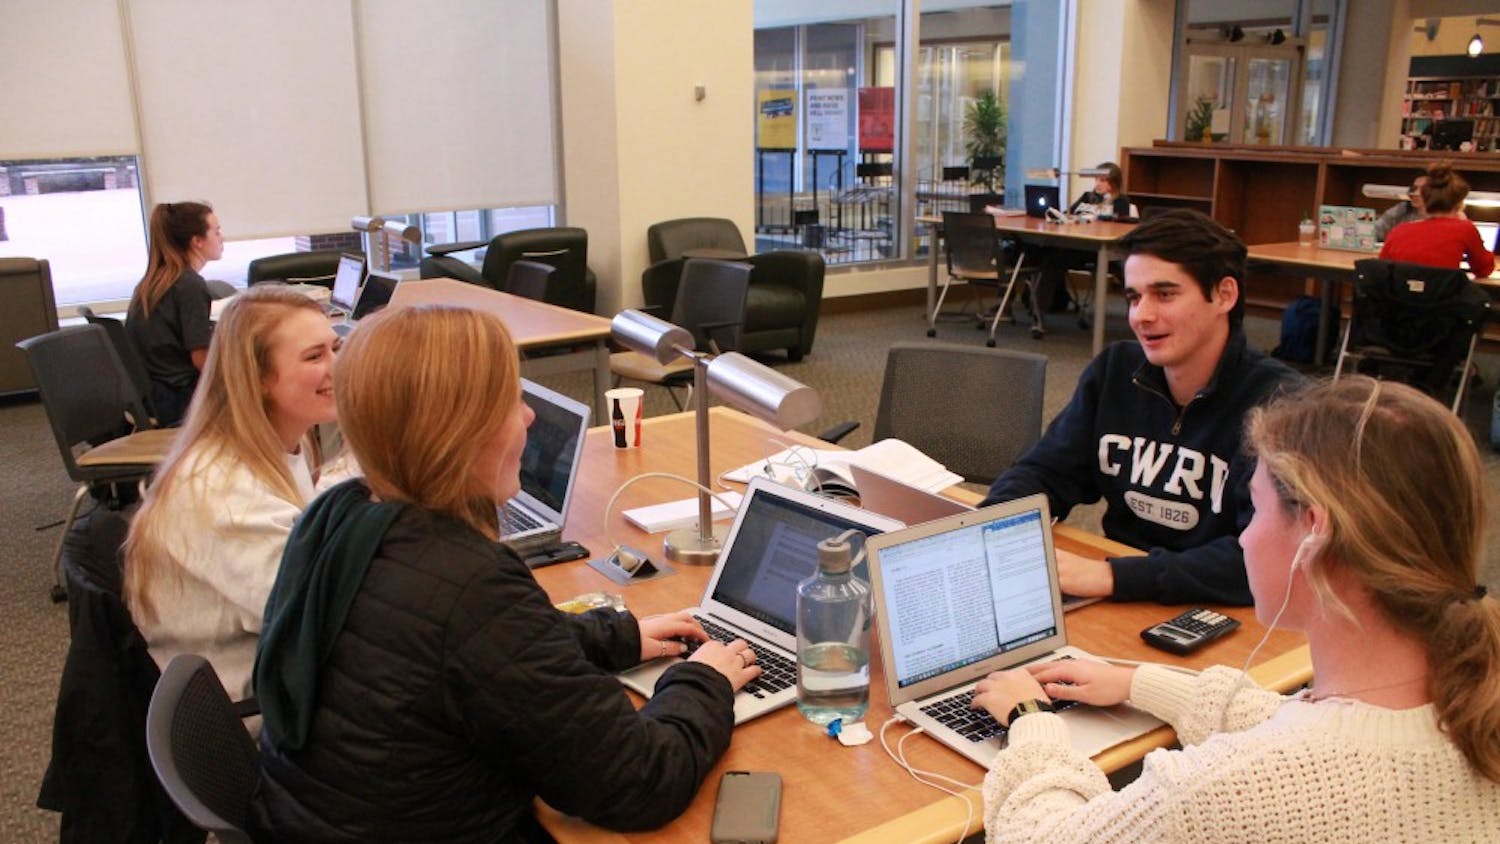 From left to right: Lauren Atkinson, Grace Clarke, Lauren Chamblee, and Sam White talk about homework together in Davis Library.